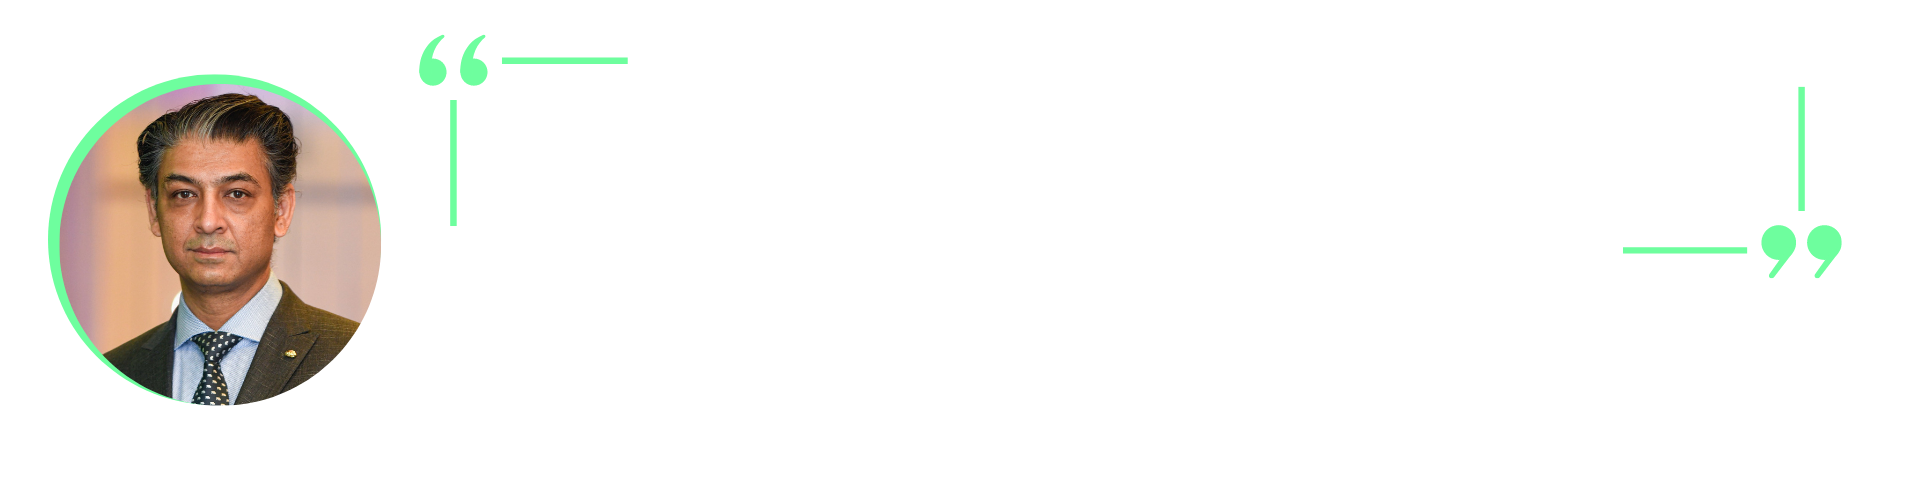 Doctor Adnan Siddiqui's quotation: "You have to devote the attention to the hemorrhage because that's going yo kill the patient before anything else."